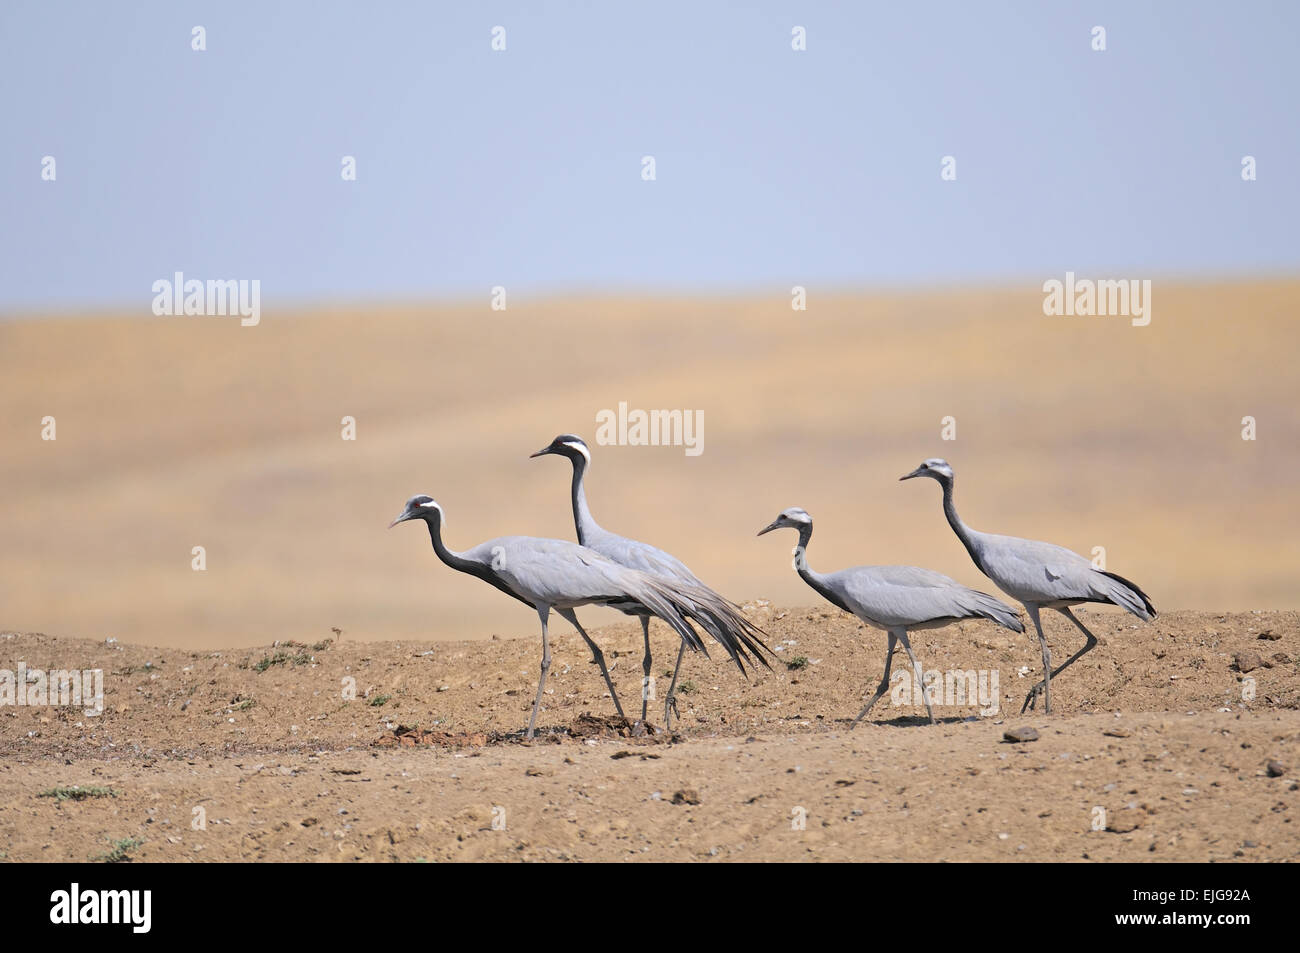 Family of Demoiselle cranes in hot steppe Stock Photo